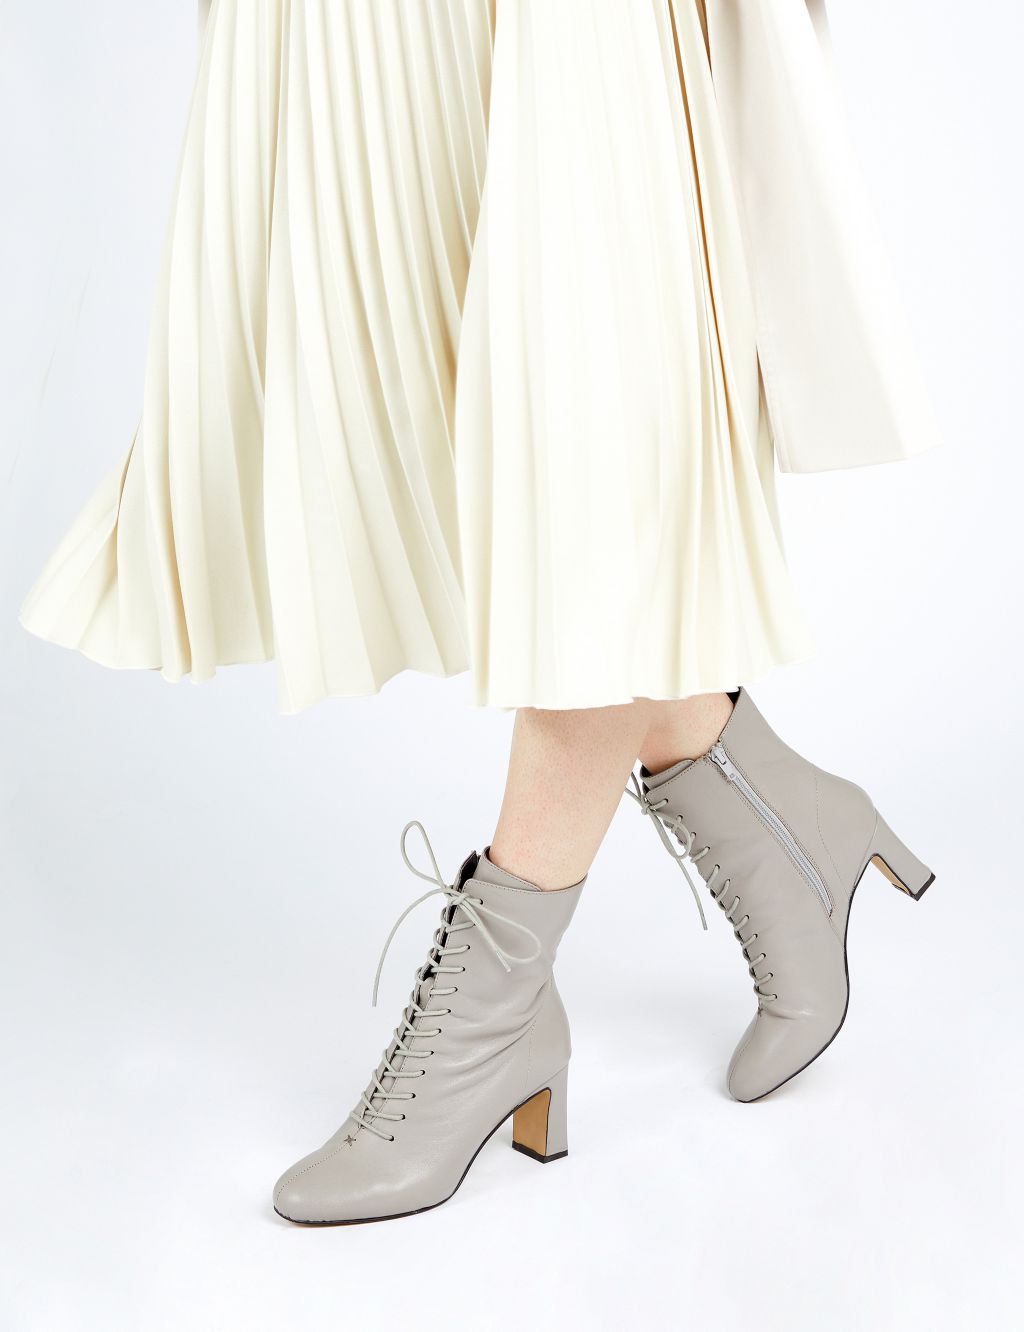 Leather Lace Up Block Heel Ankle Boots image 1